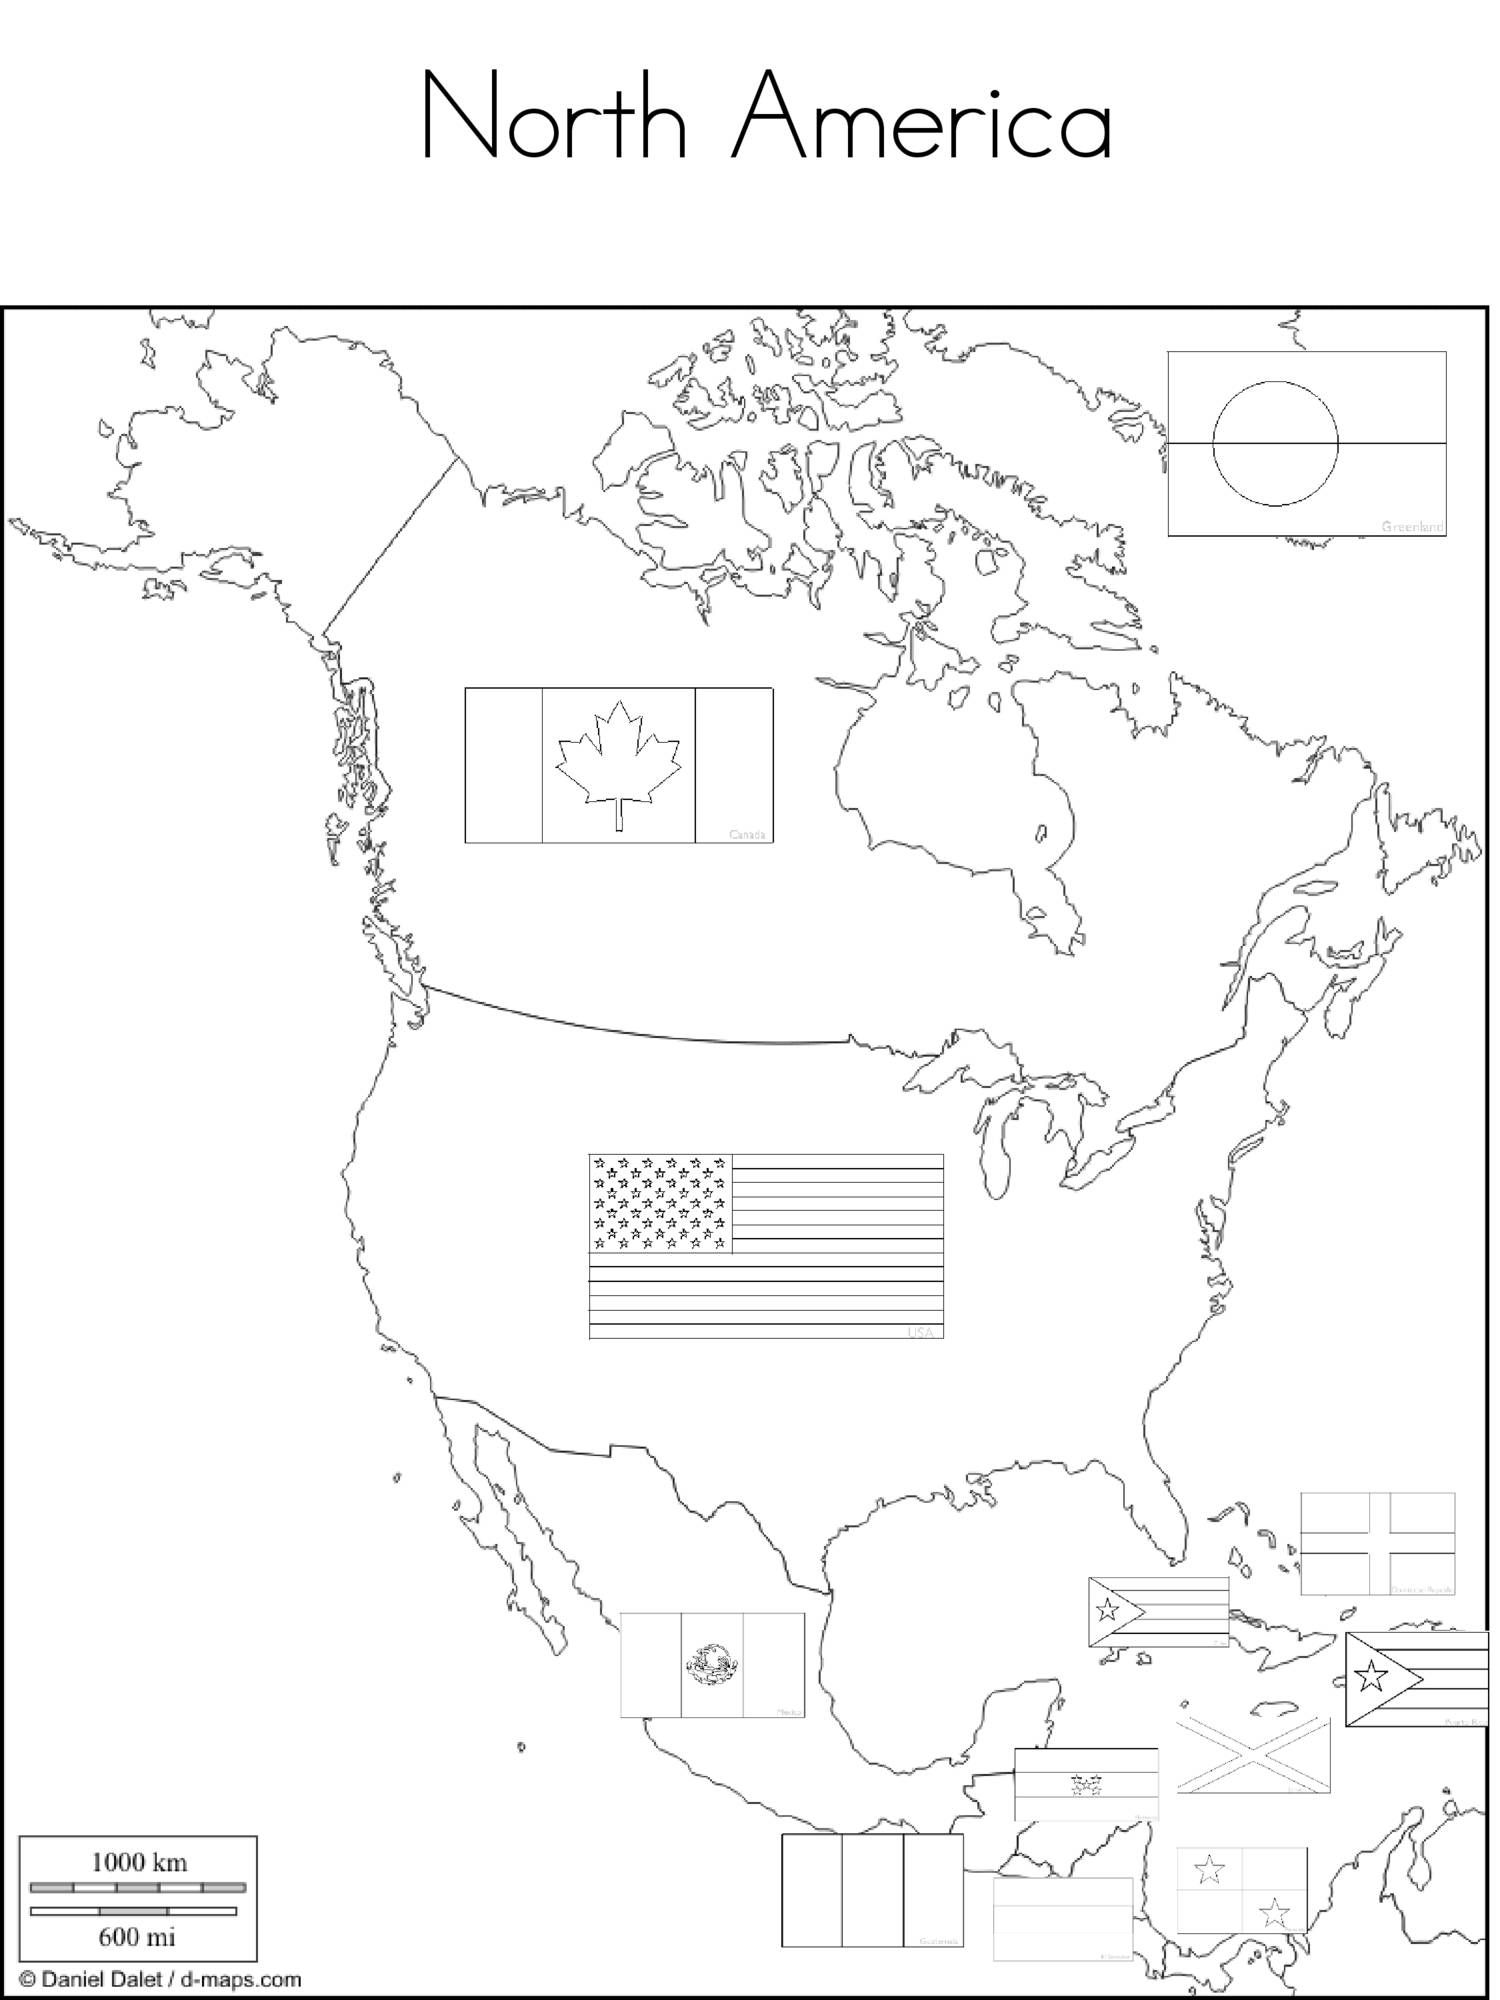 Flags on Map Coloring Pages NorthAmerica SouthAmerica Europe Africa.pdf |  Flag coloring pages, American flag coloring page, World map coloring page